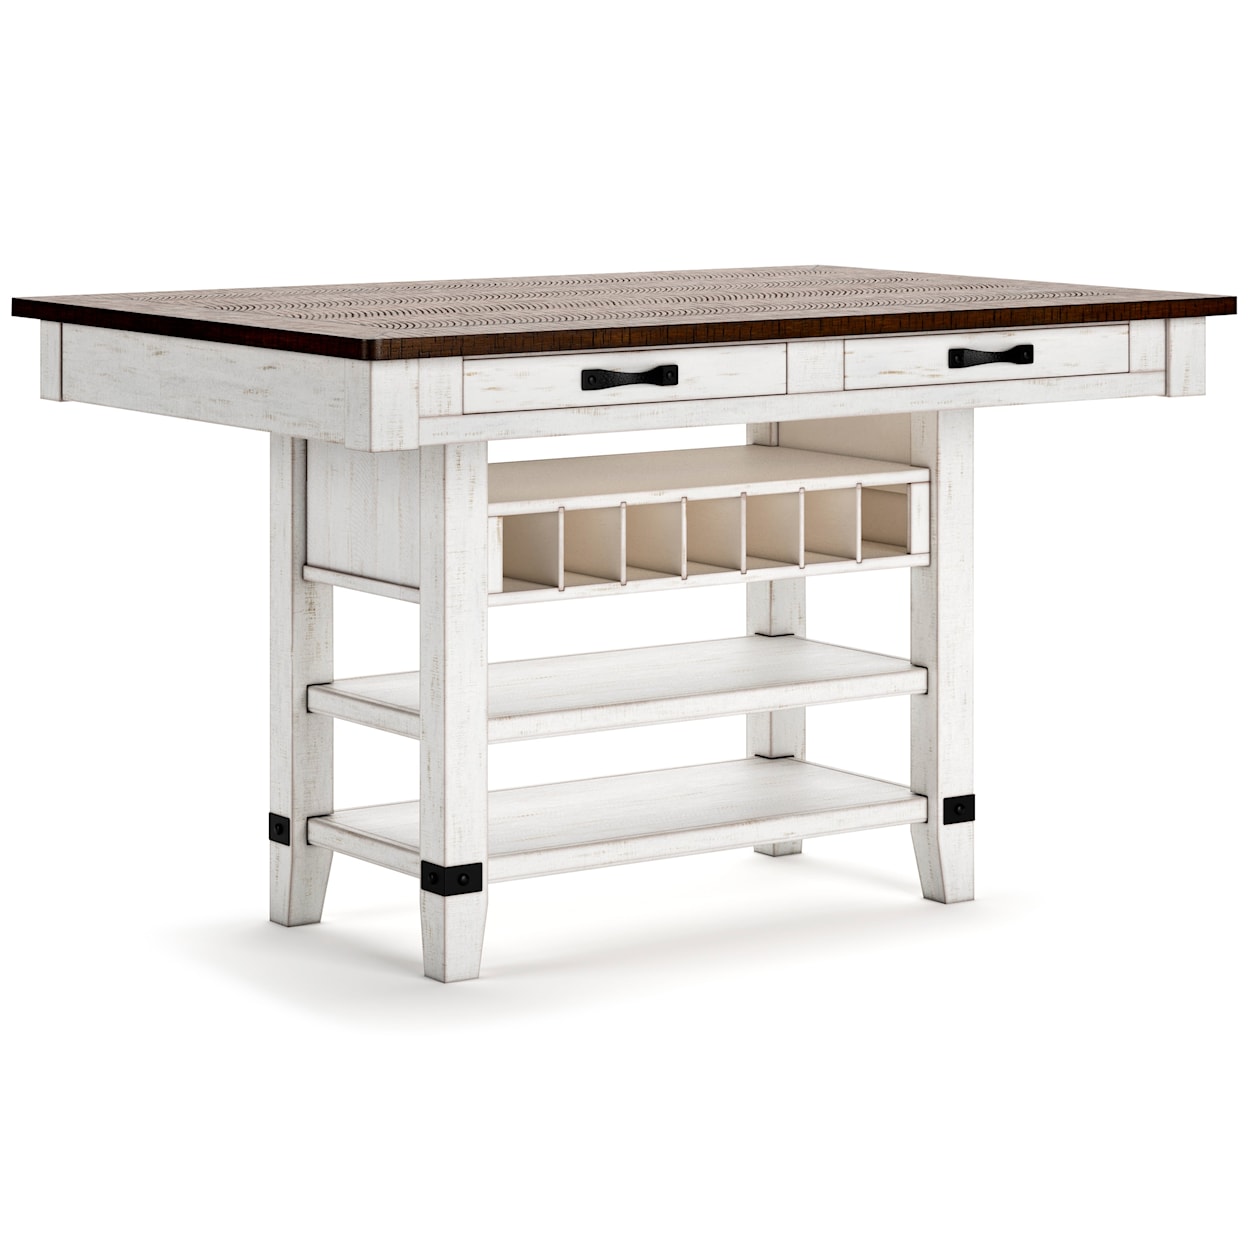 Signature Design by Ashley Valebeck Counter Height Dining Table